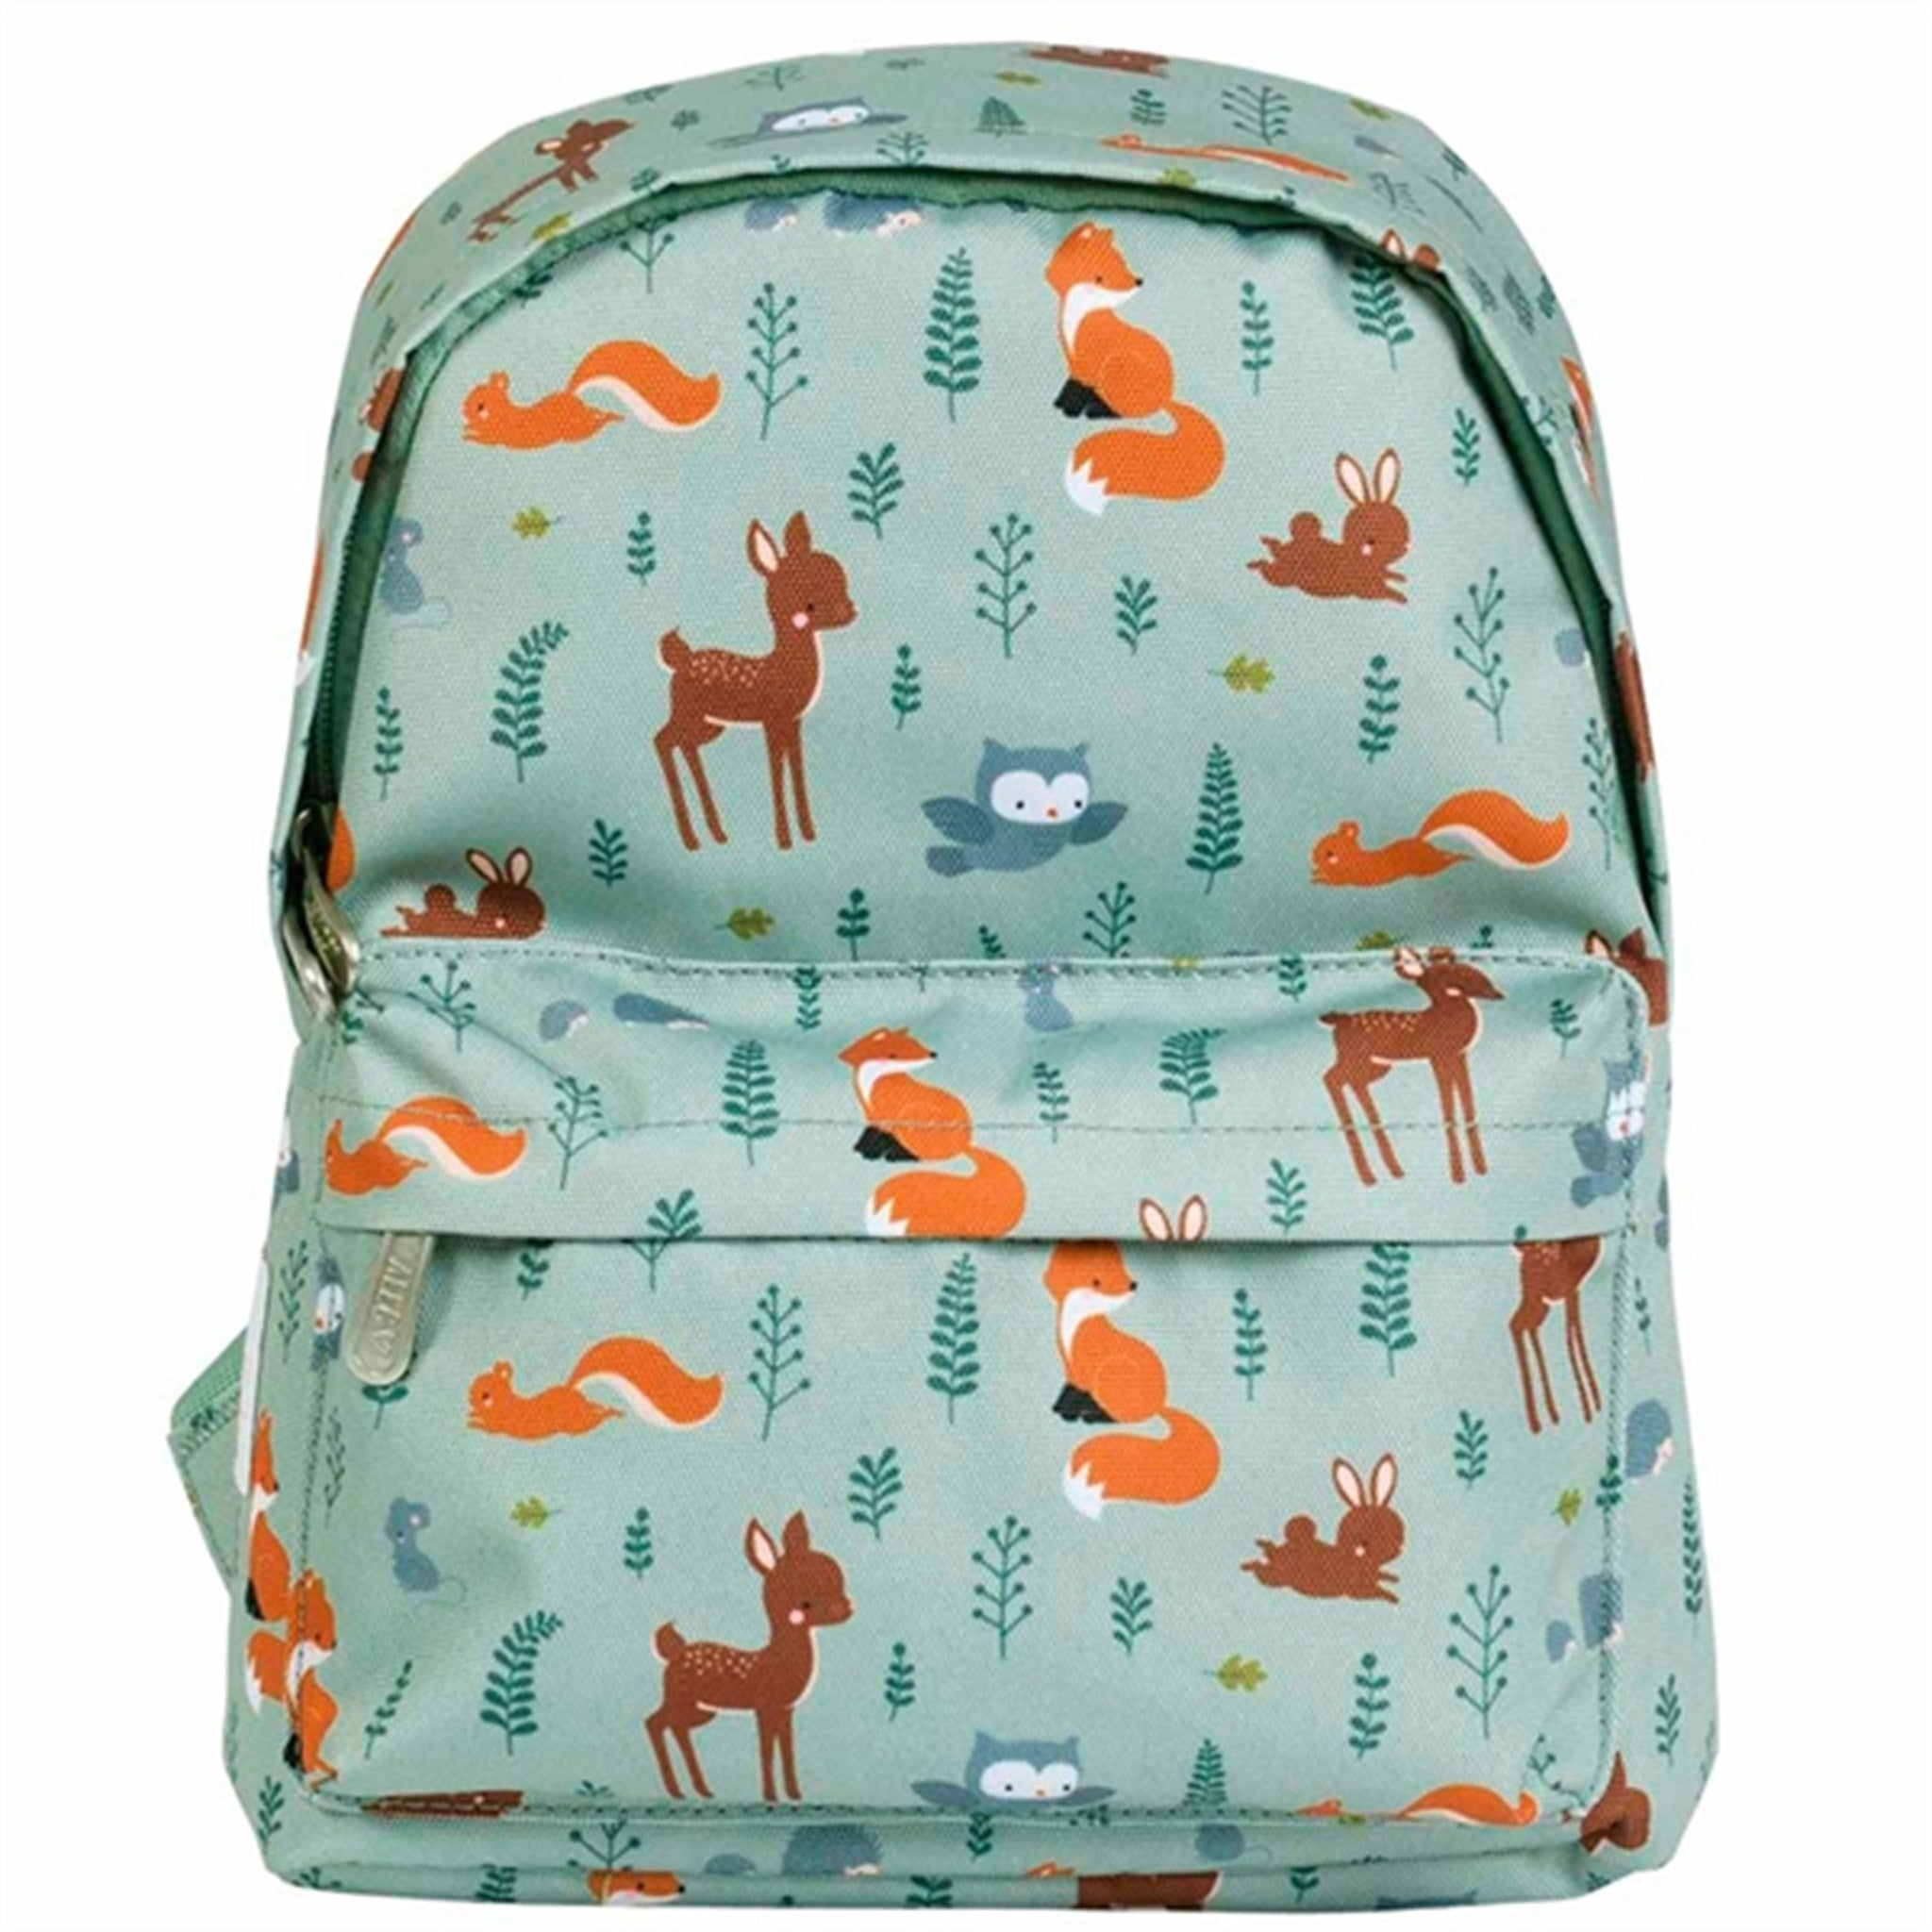 A Little Lovely Company Backpack Small Forest Friends 2